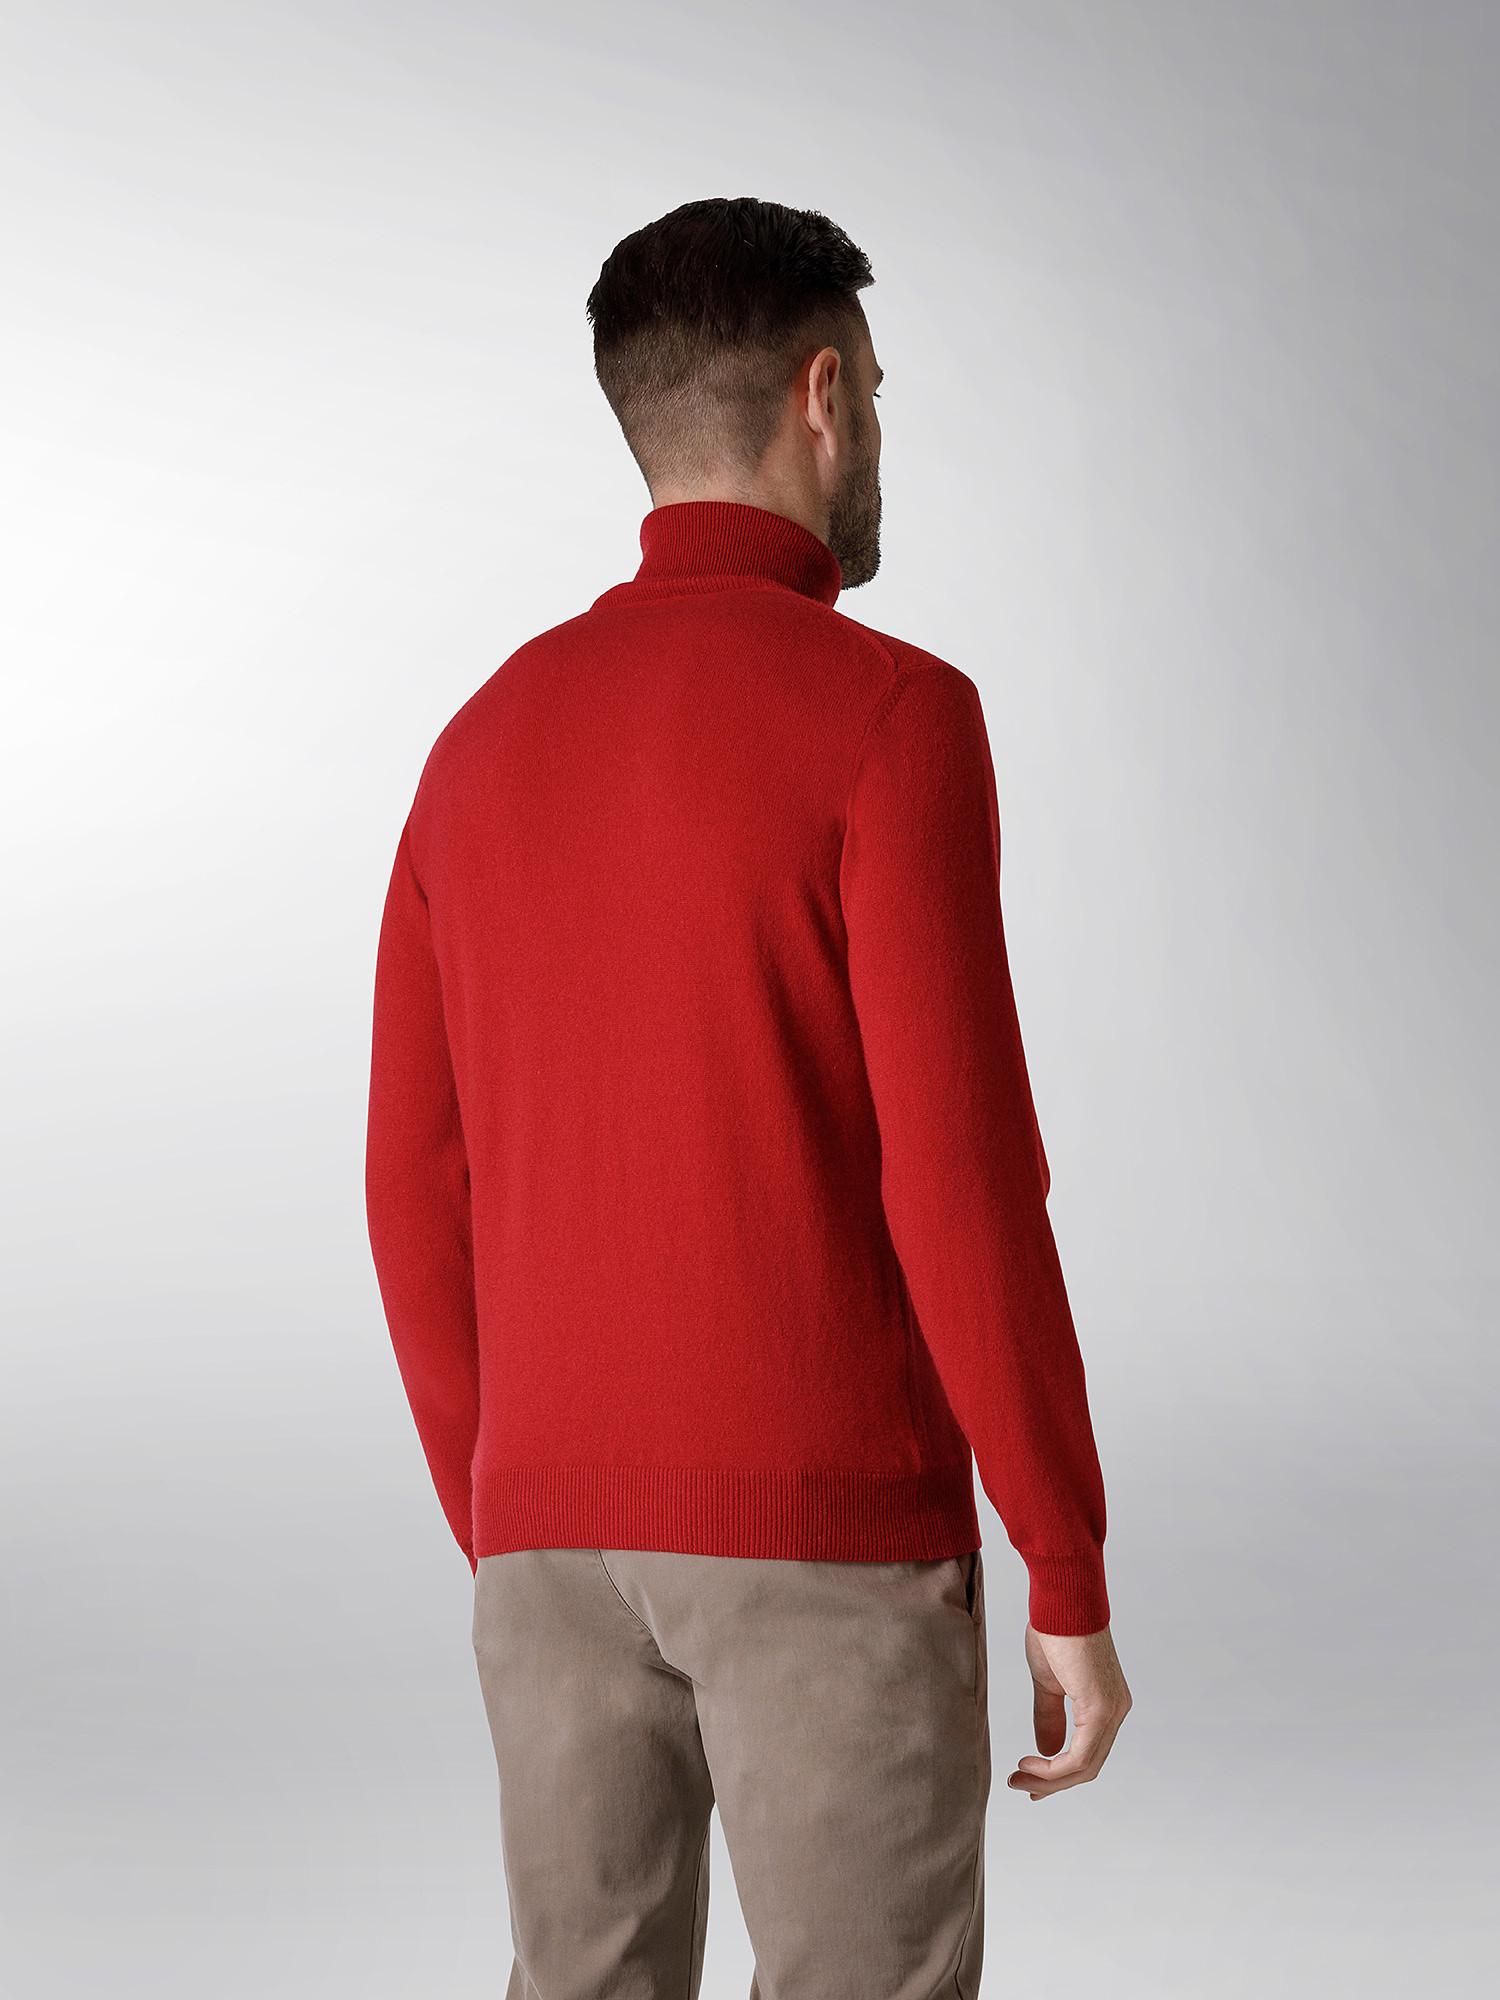 Coin Cashmere - Turtleneck in pure cashmere, Red, large image number 2